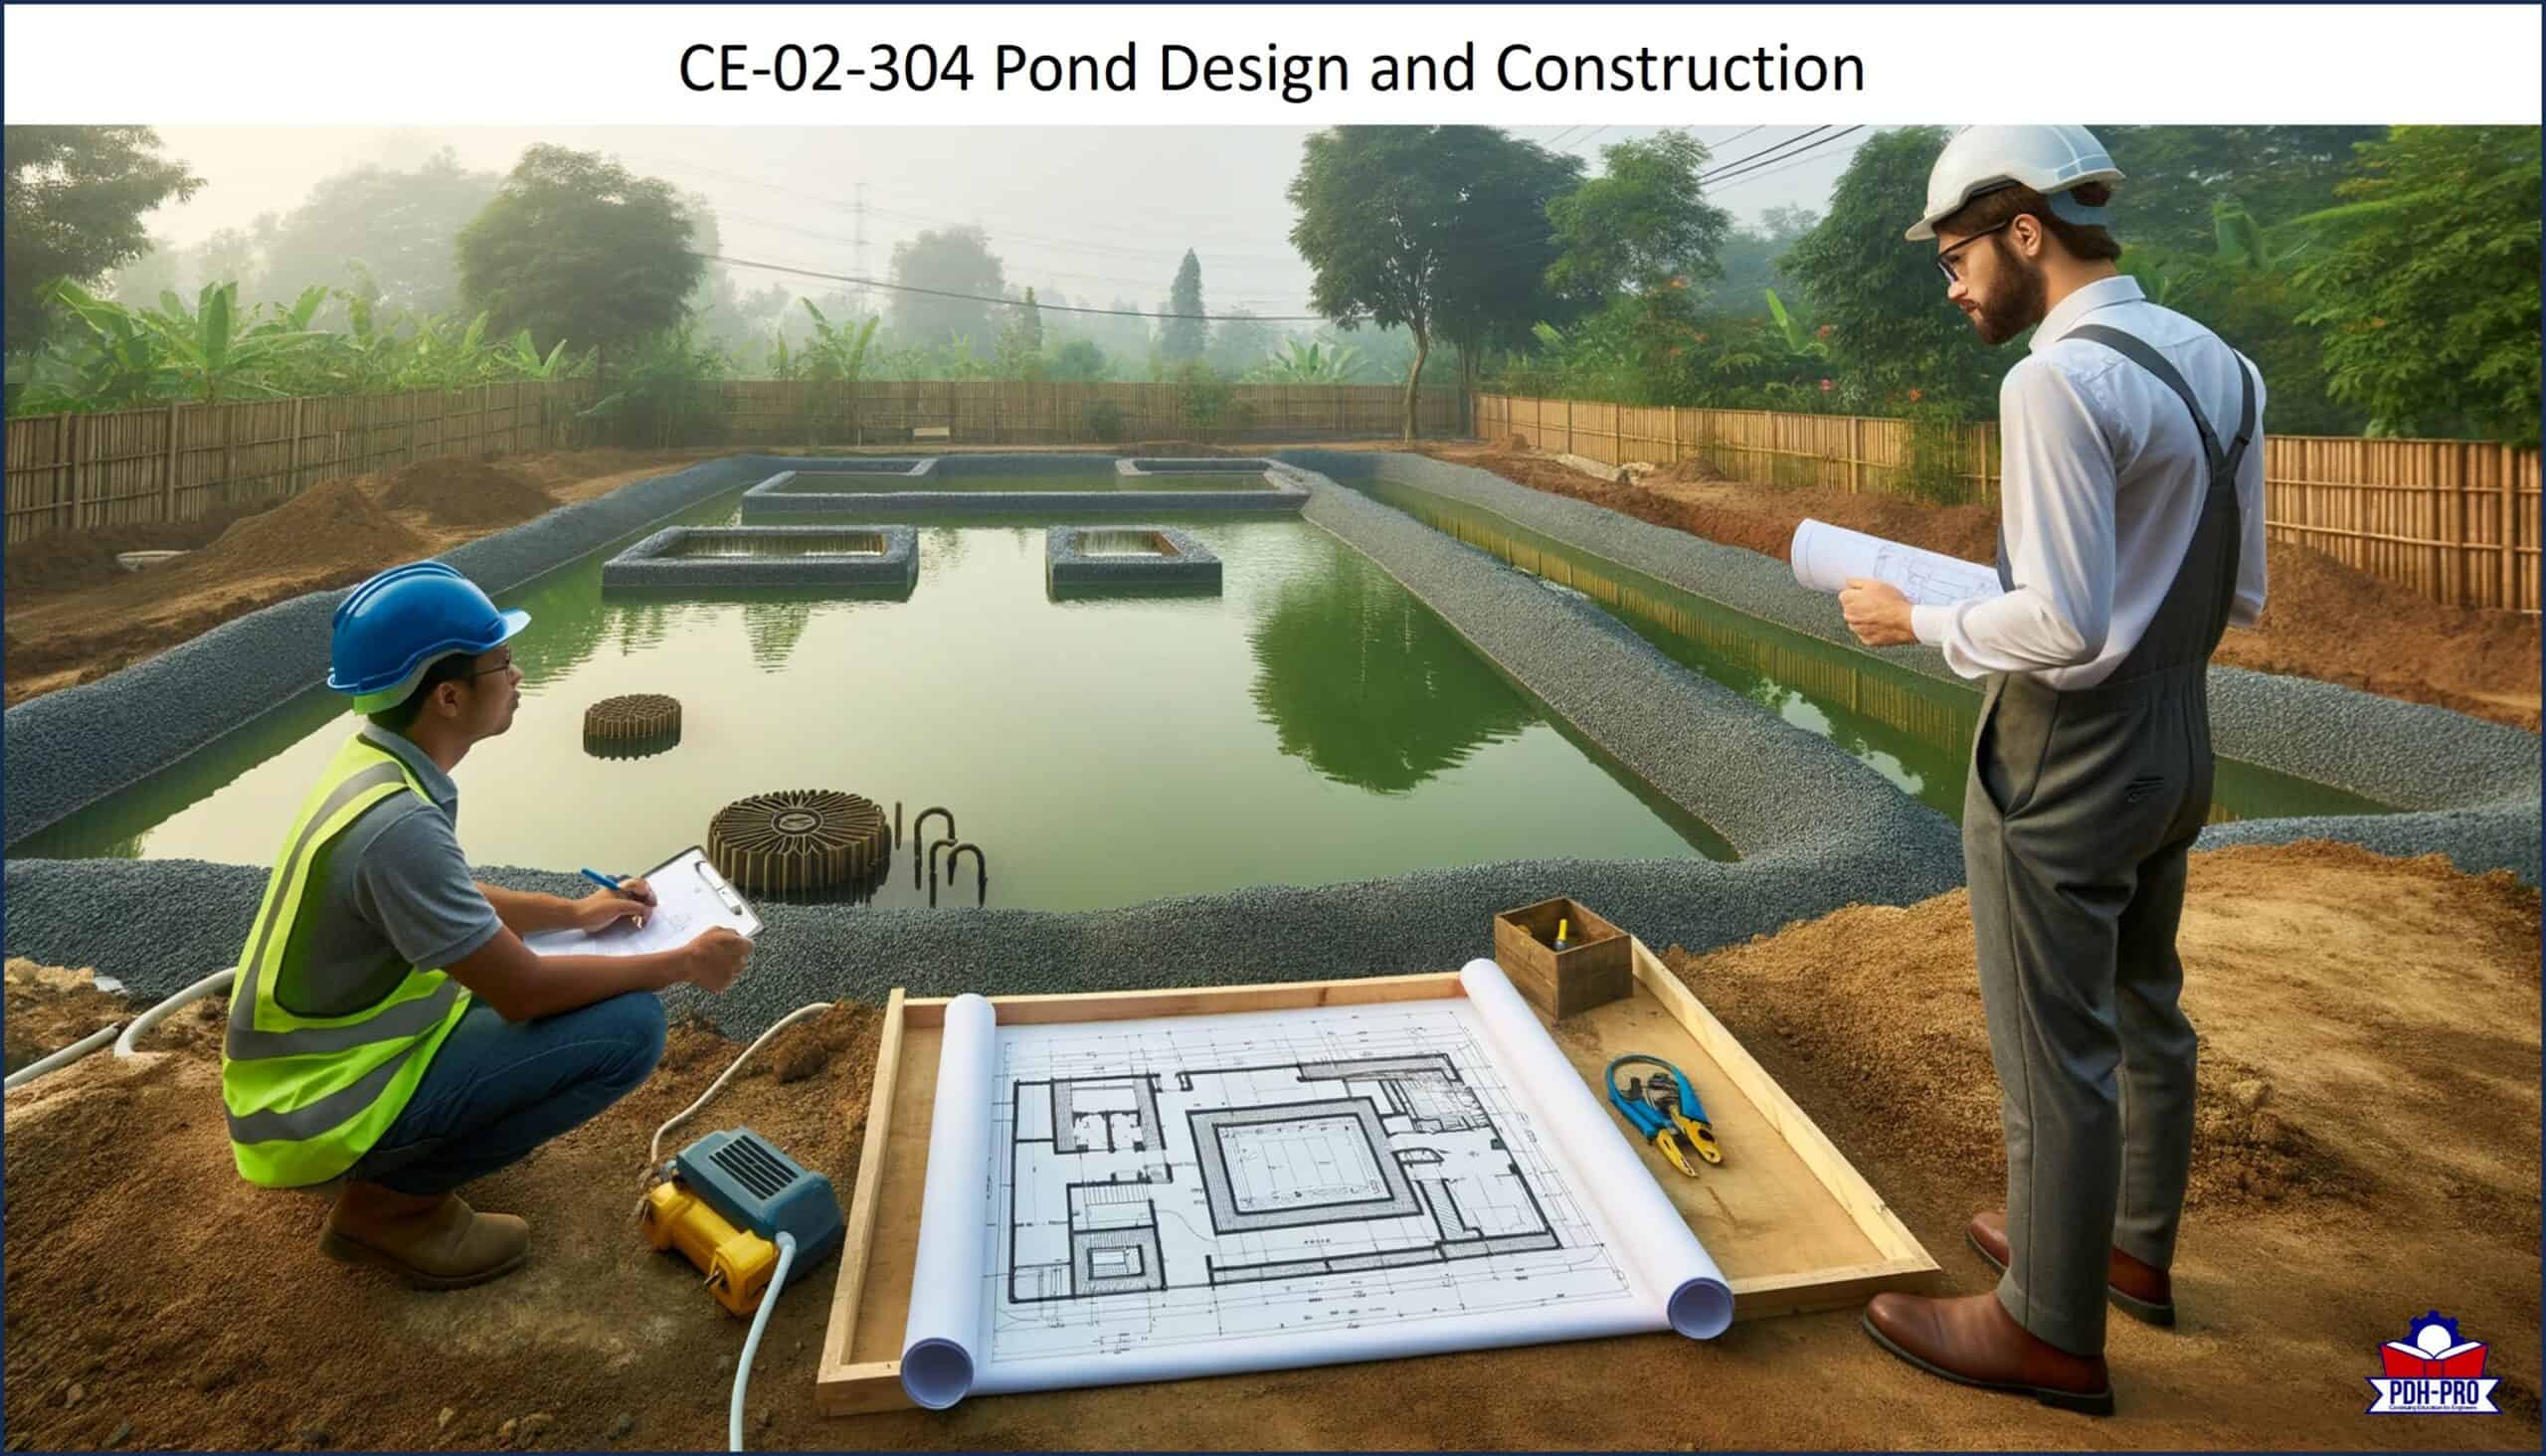 Pond Design and Construction